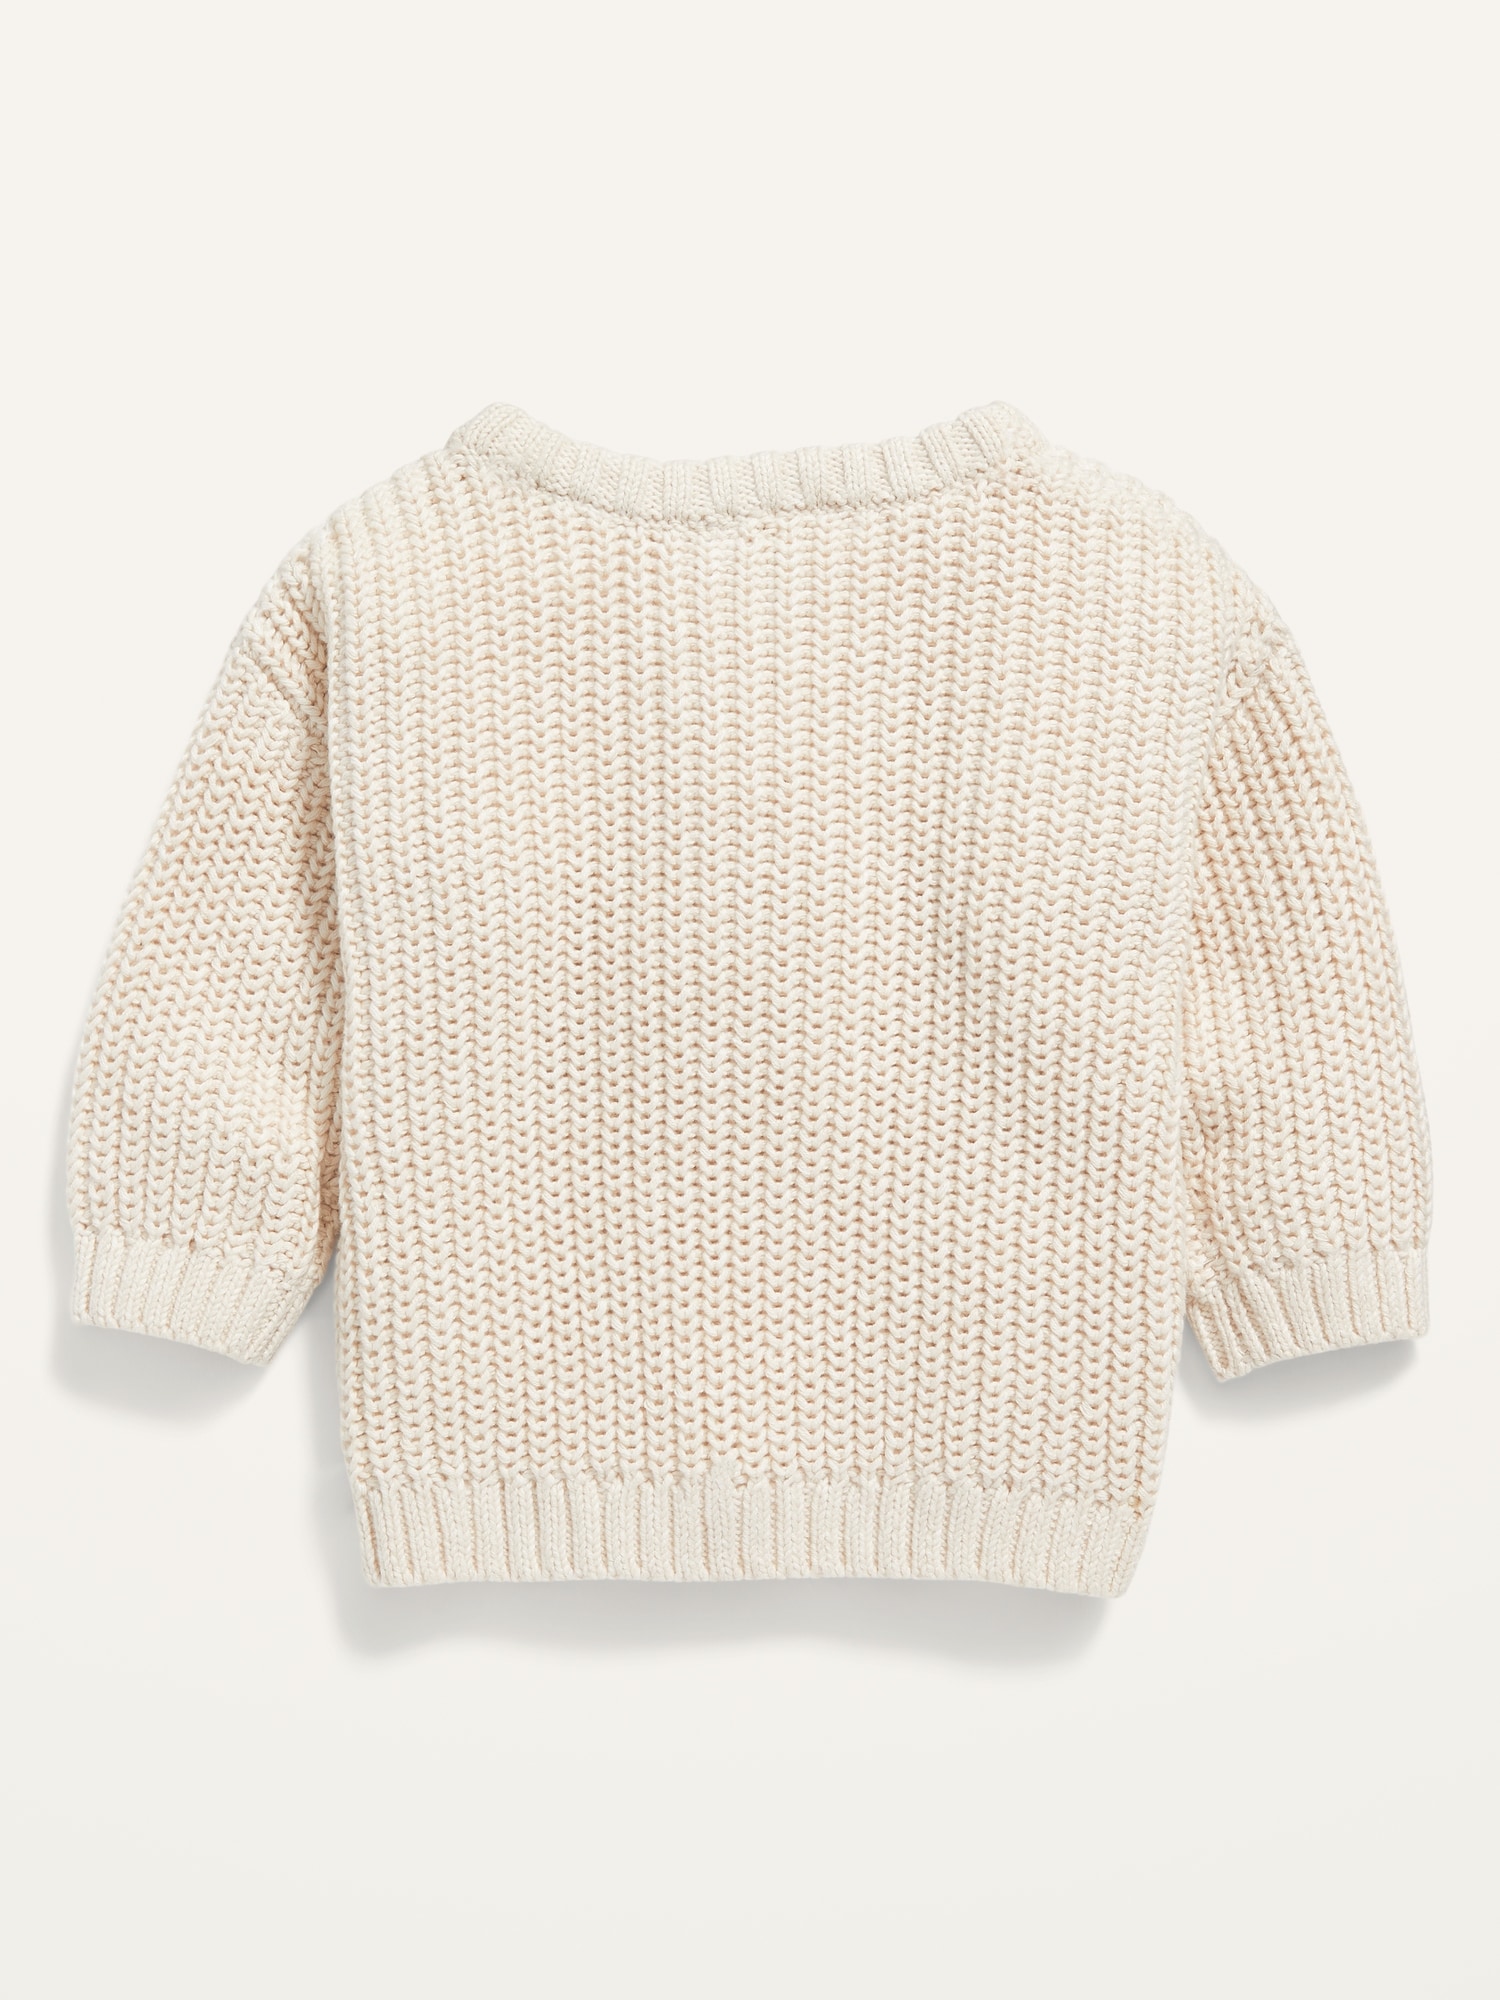 Unisex Shaker-Stitch Pullover Sweater for Baby | Old Navy